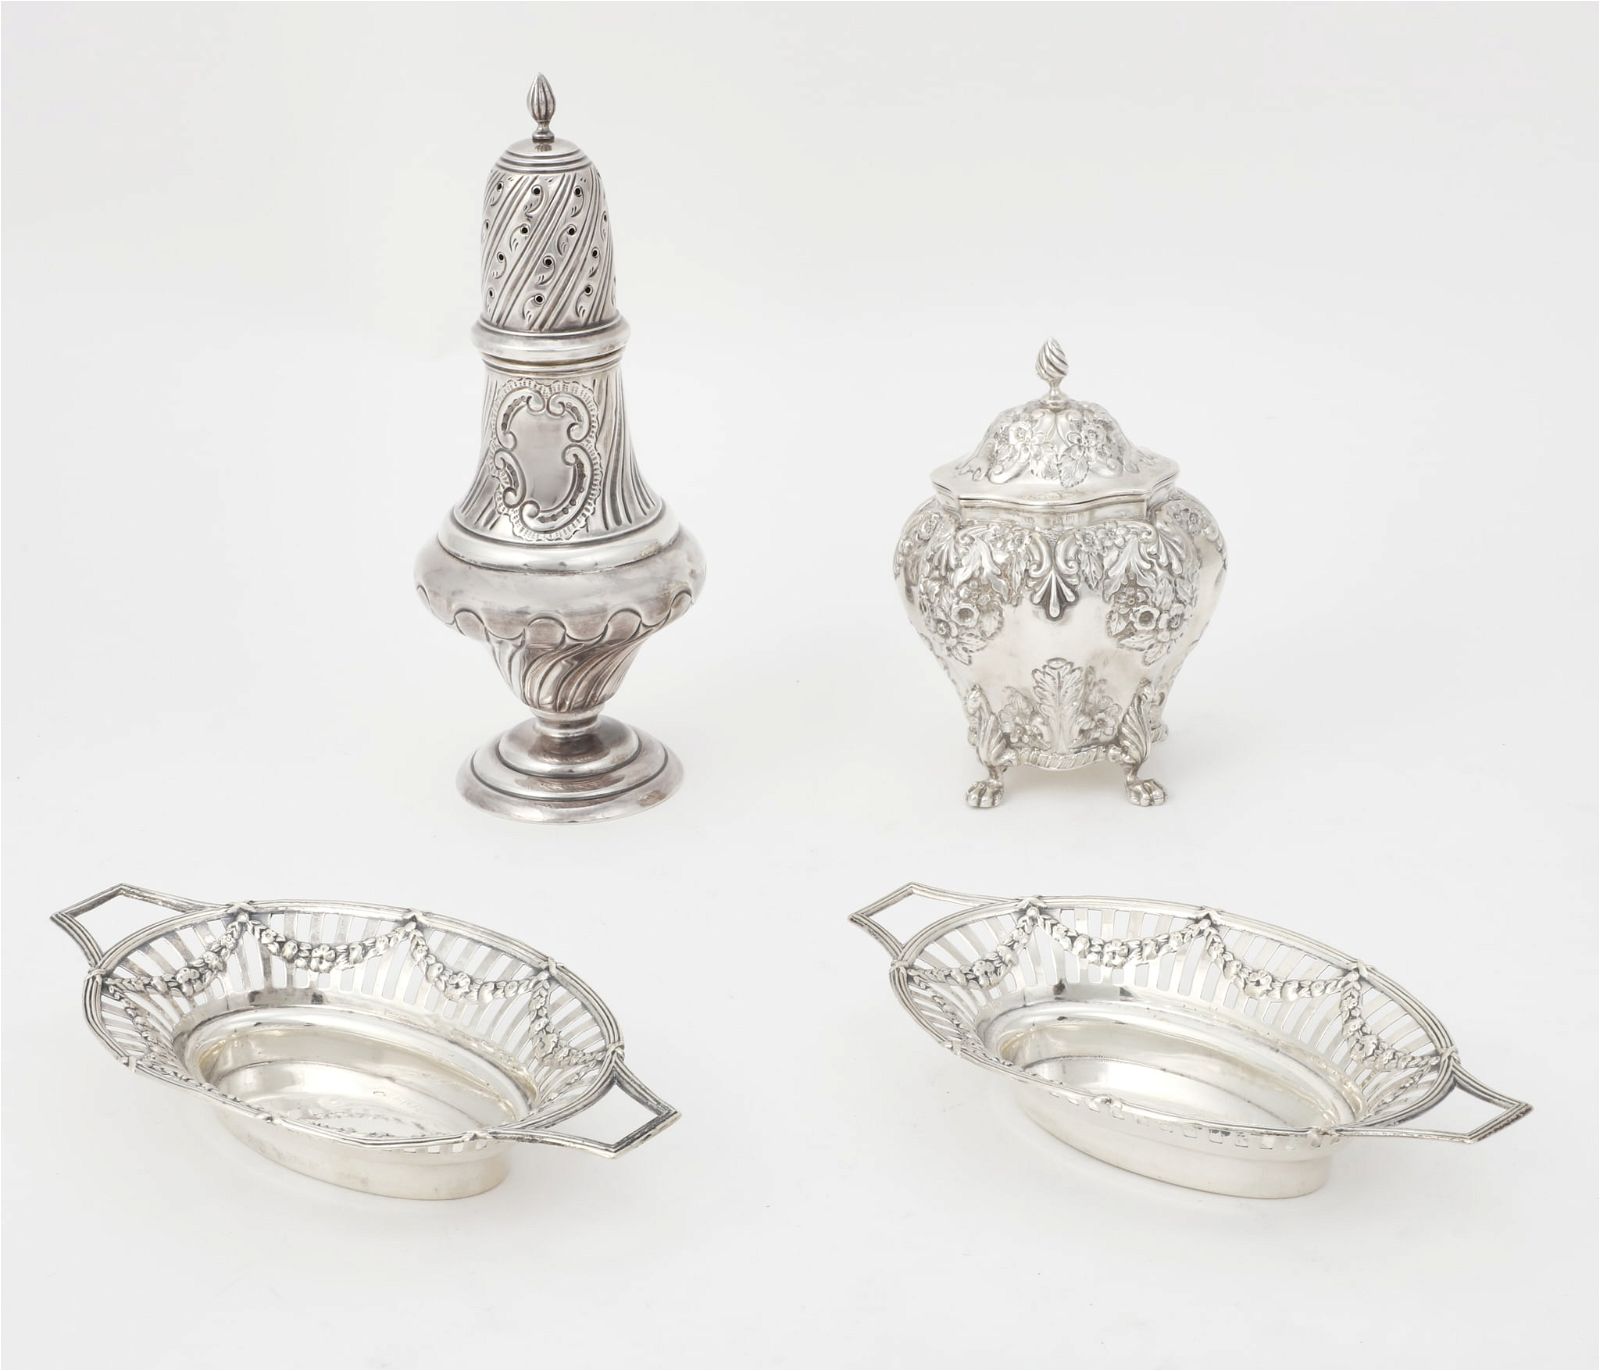 FOUR ENGLISH STERLING SILVER TABLEWARESFour 2fb2aaa